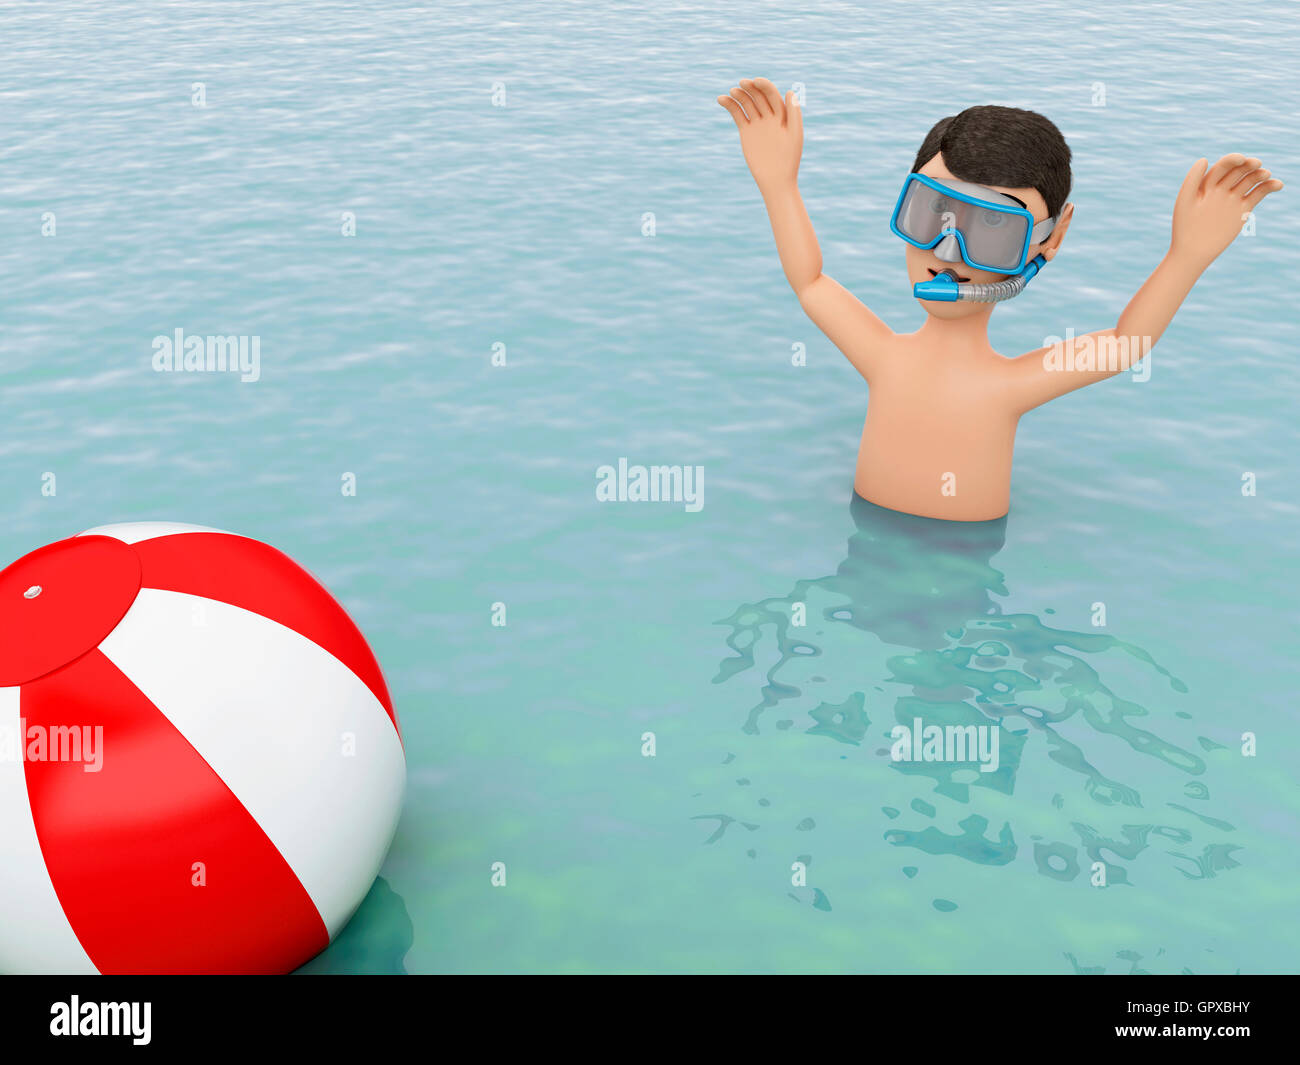 3d illustration. Young people with beach ball in the sea. Summer vacation concept Stock Photo